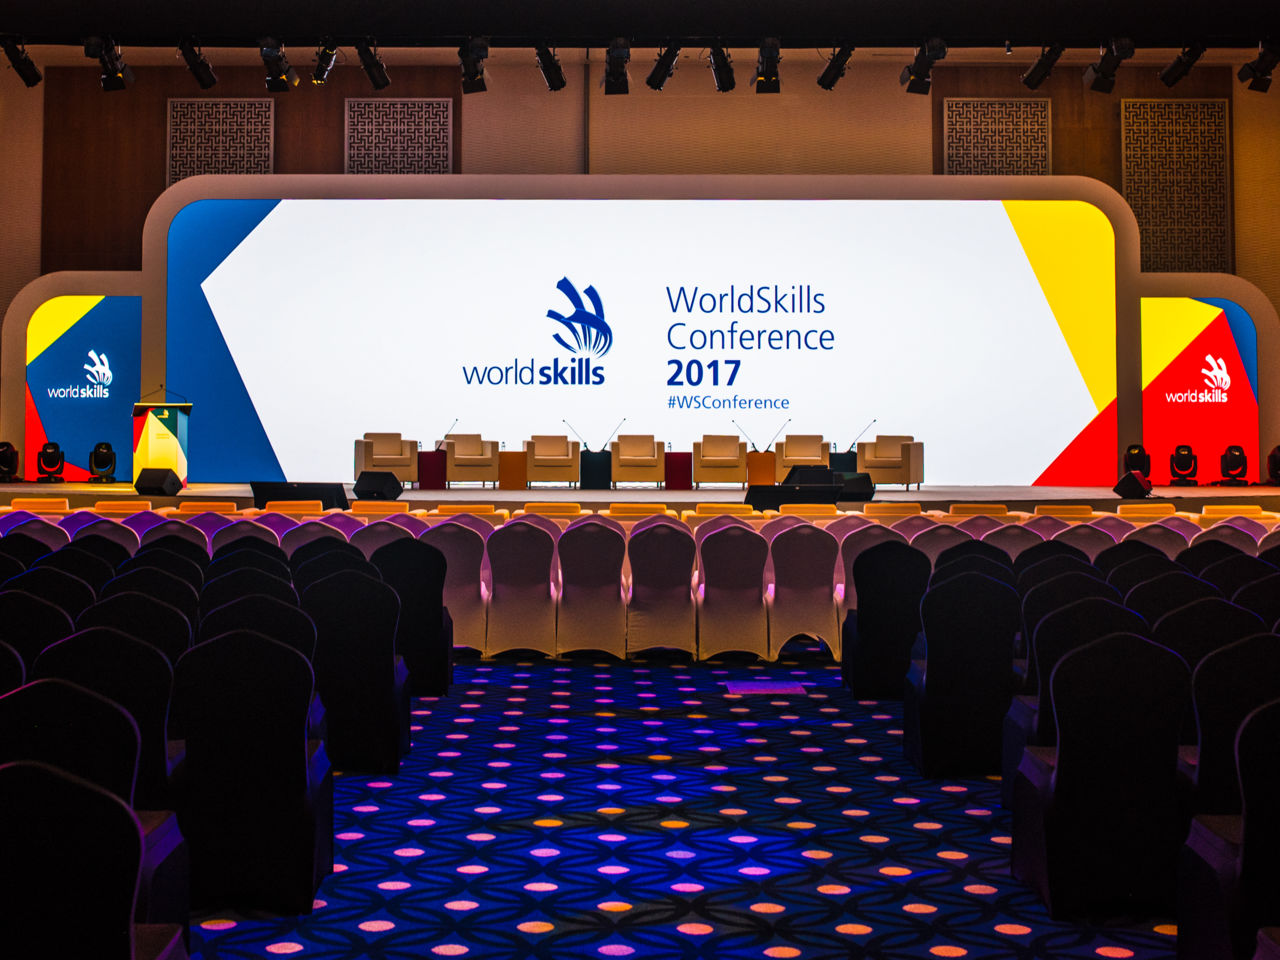 WorldSkills Conference 2017 aims to ensure vocational skills meet the needs of a changing world